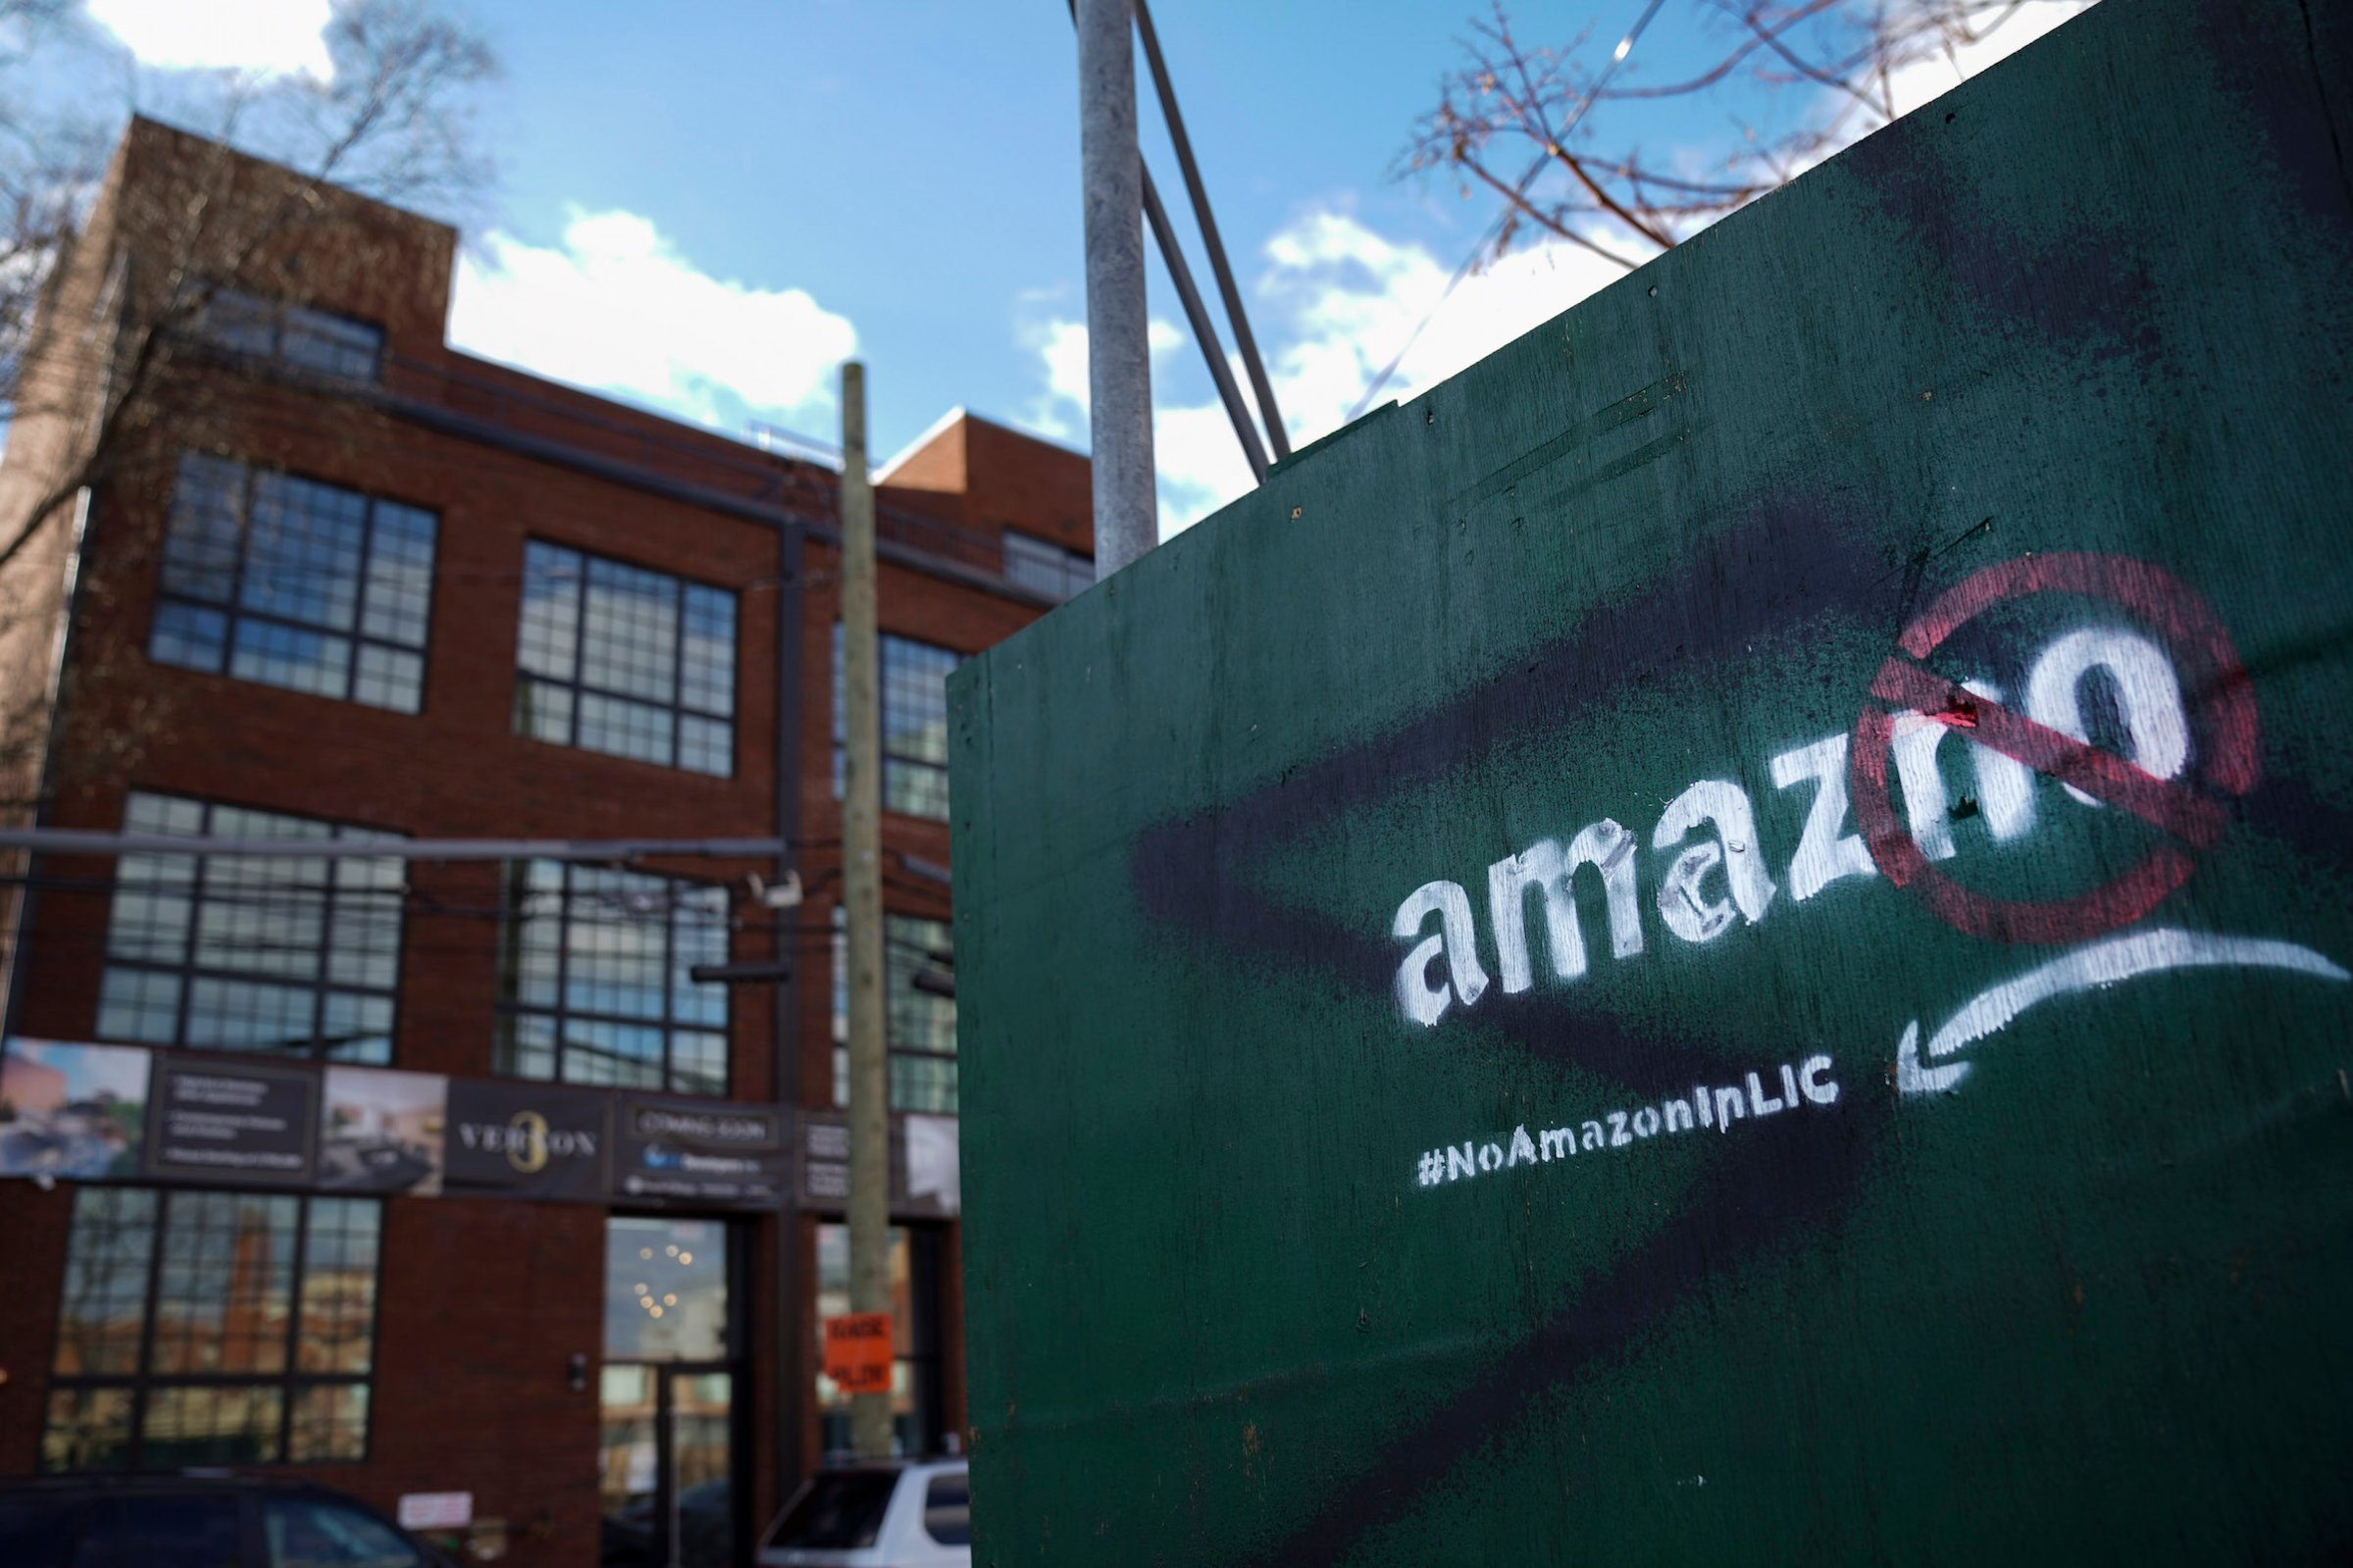 Long Island City's Faces Changes With Amazon Selecting Neighborhood For New HQ